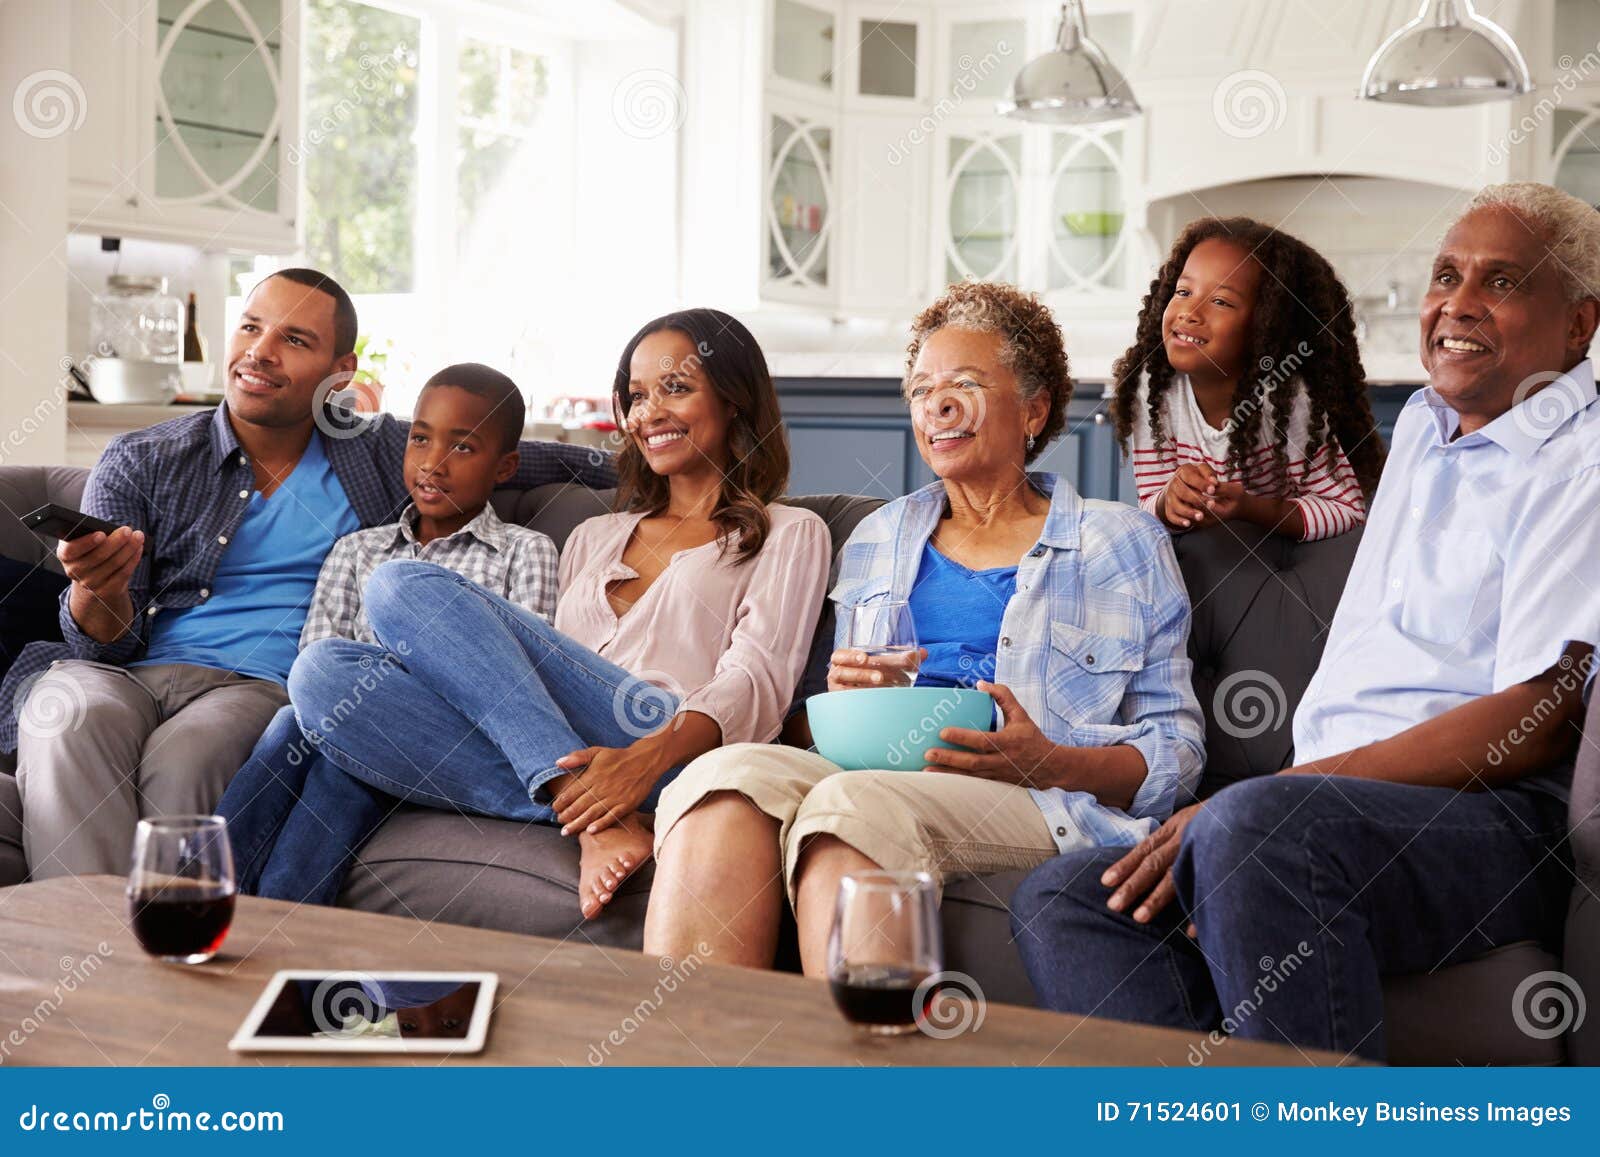 multi generation black family watching movie on tv together